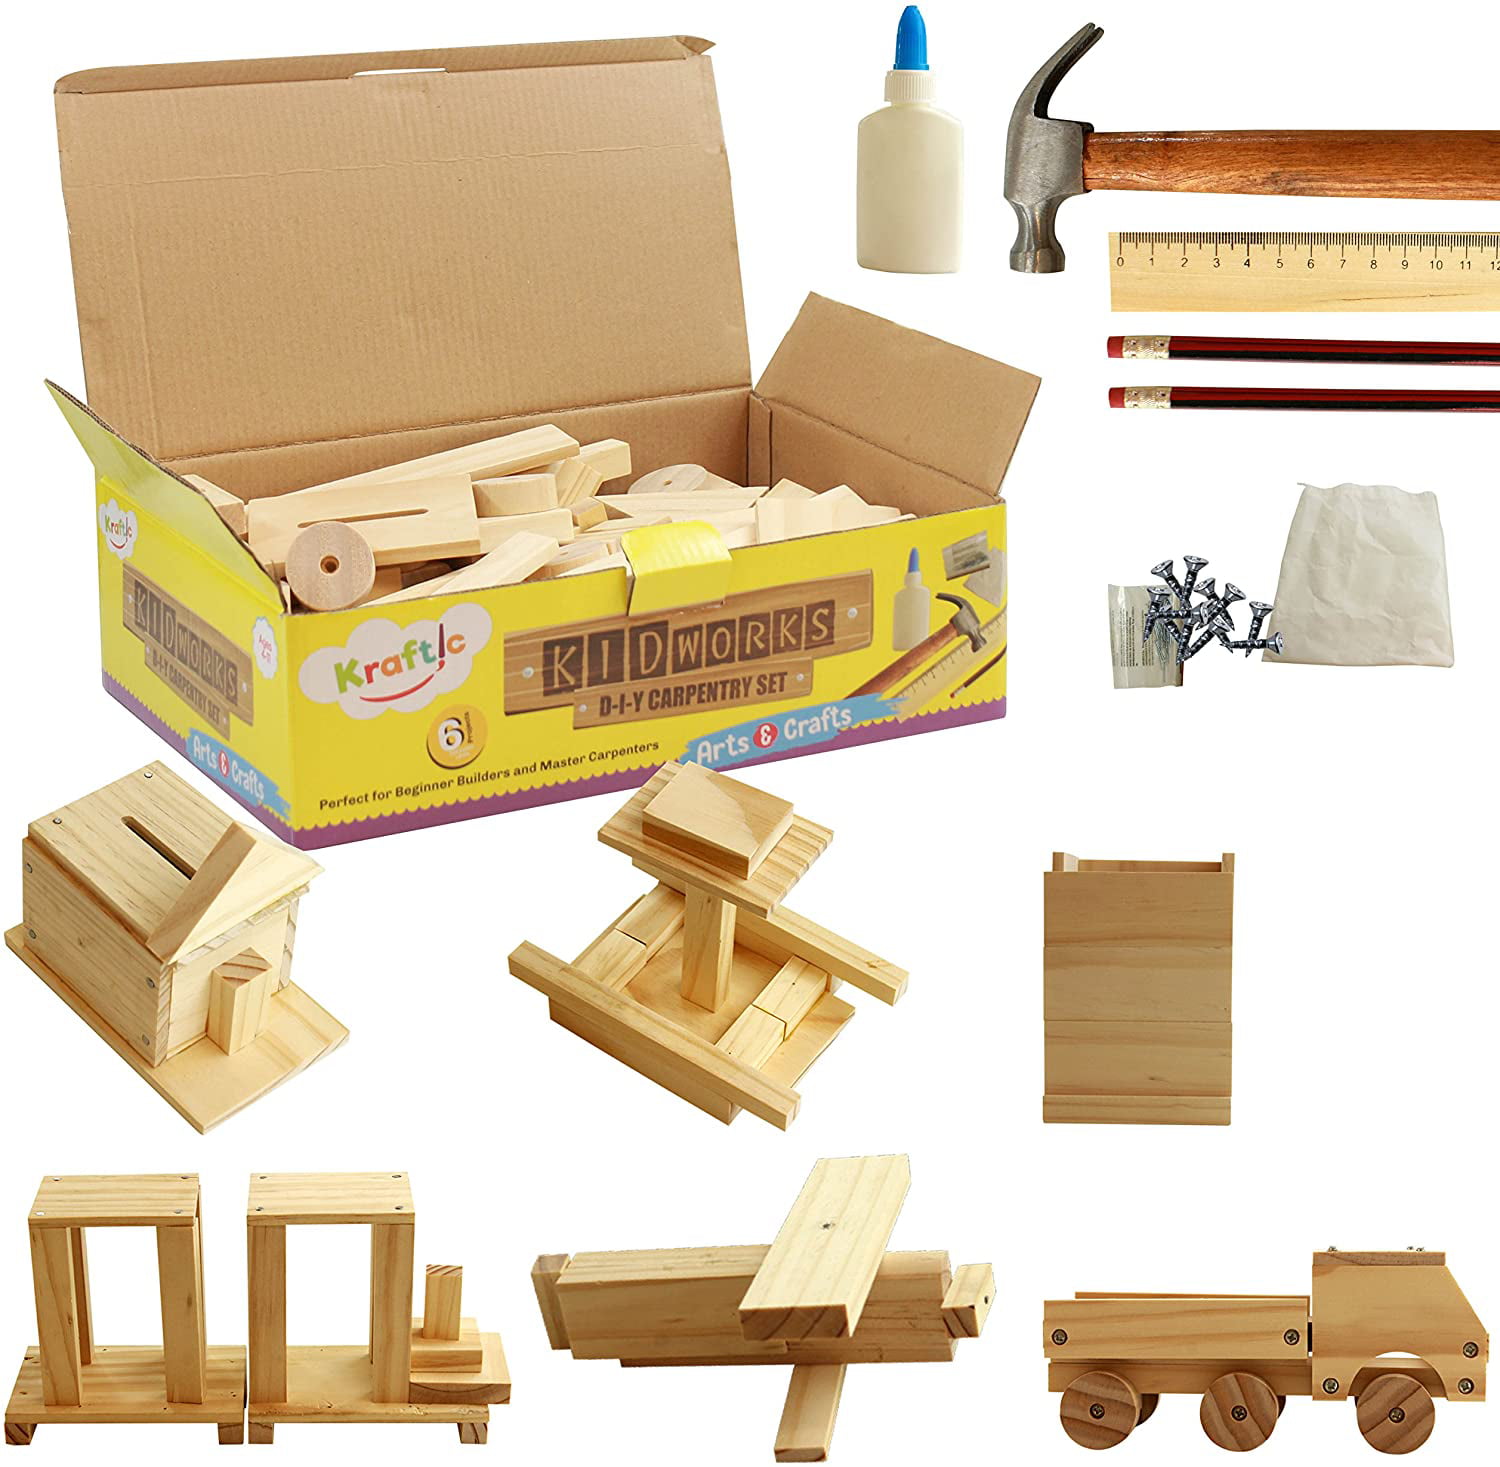 Kraftic Woodworking Building Kit for Kids Hummer with 3 DIY Carpentry Wood Toy Projects Excavator and Bird-Feeder 